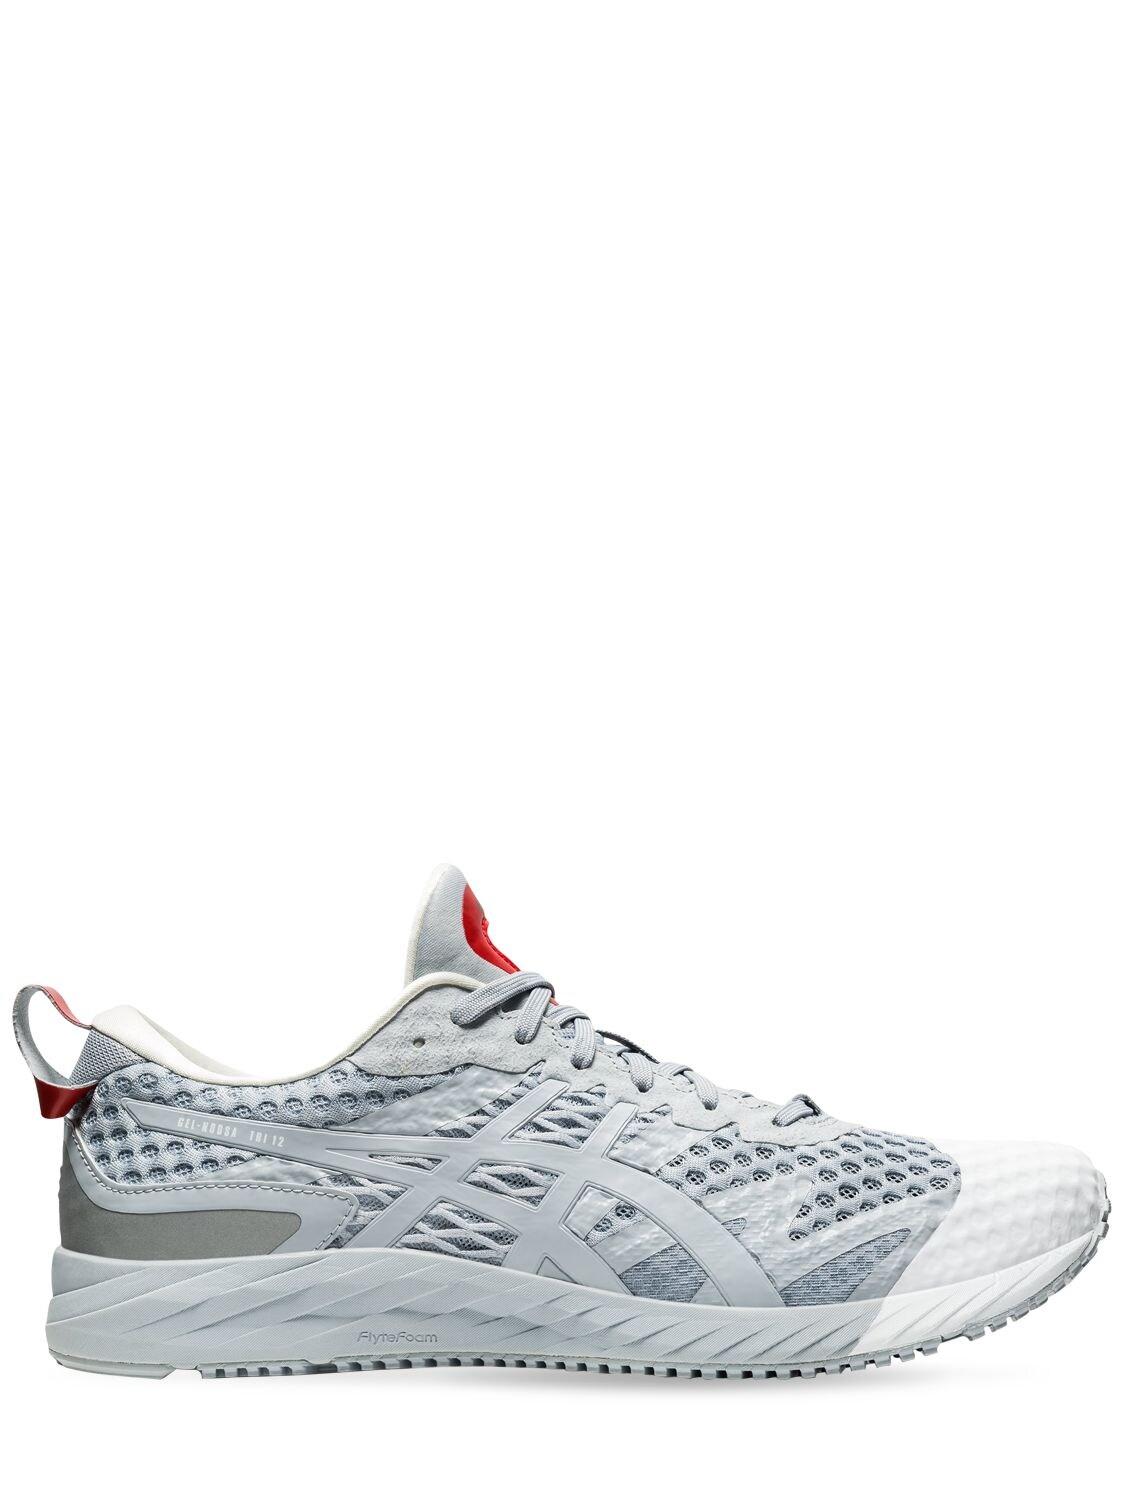 Asics Lace X Affix Gel-noosa Tri 12 in Grey (Gray) for Men - Save 51 